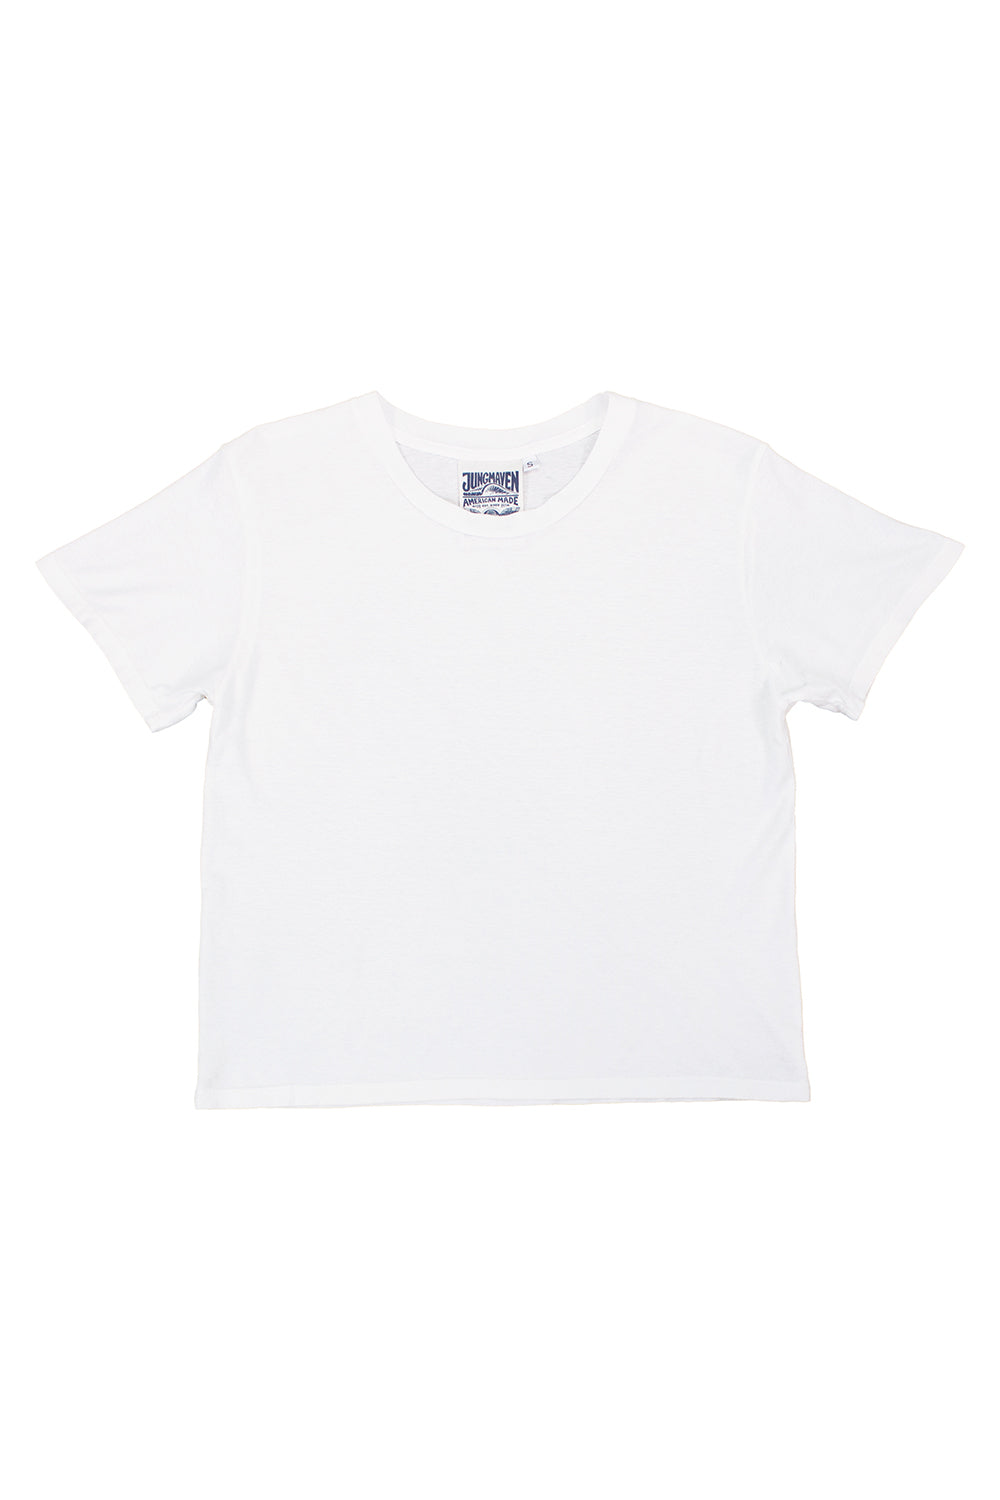 Cropped Ojai Tee | Jungmaven Hemp Clothing & Accessories / Color: Washed White